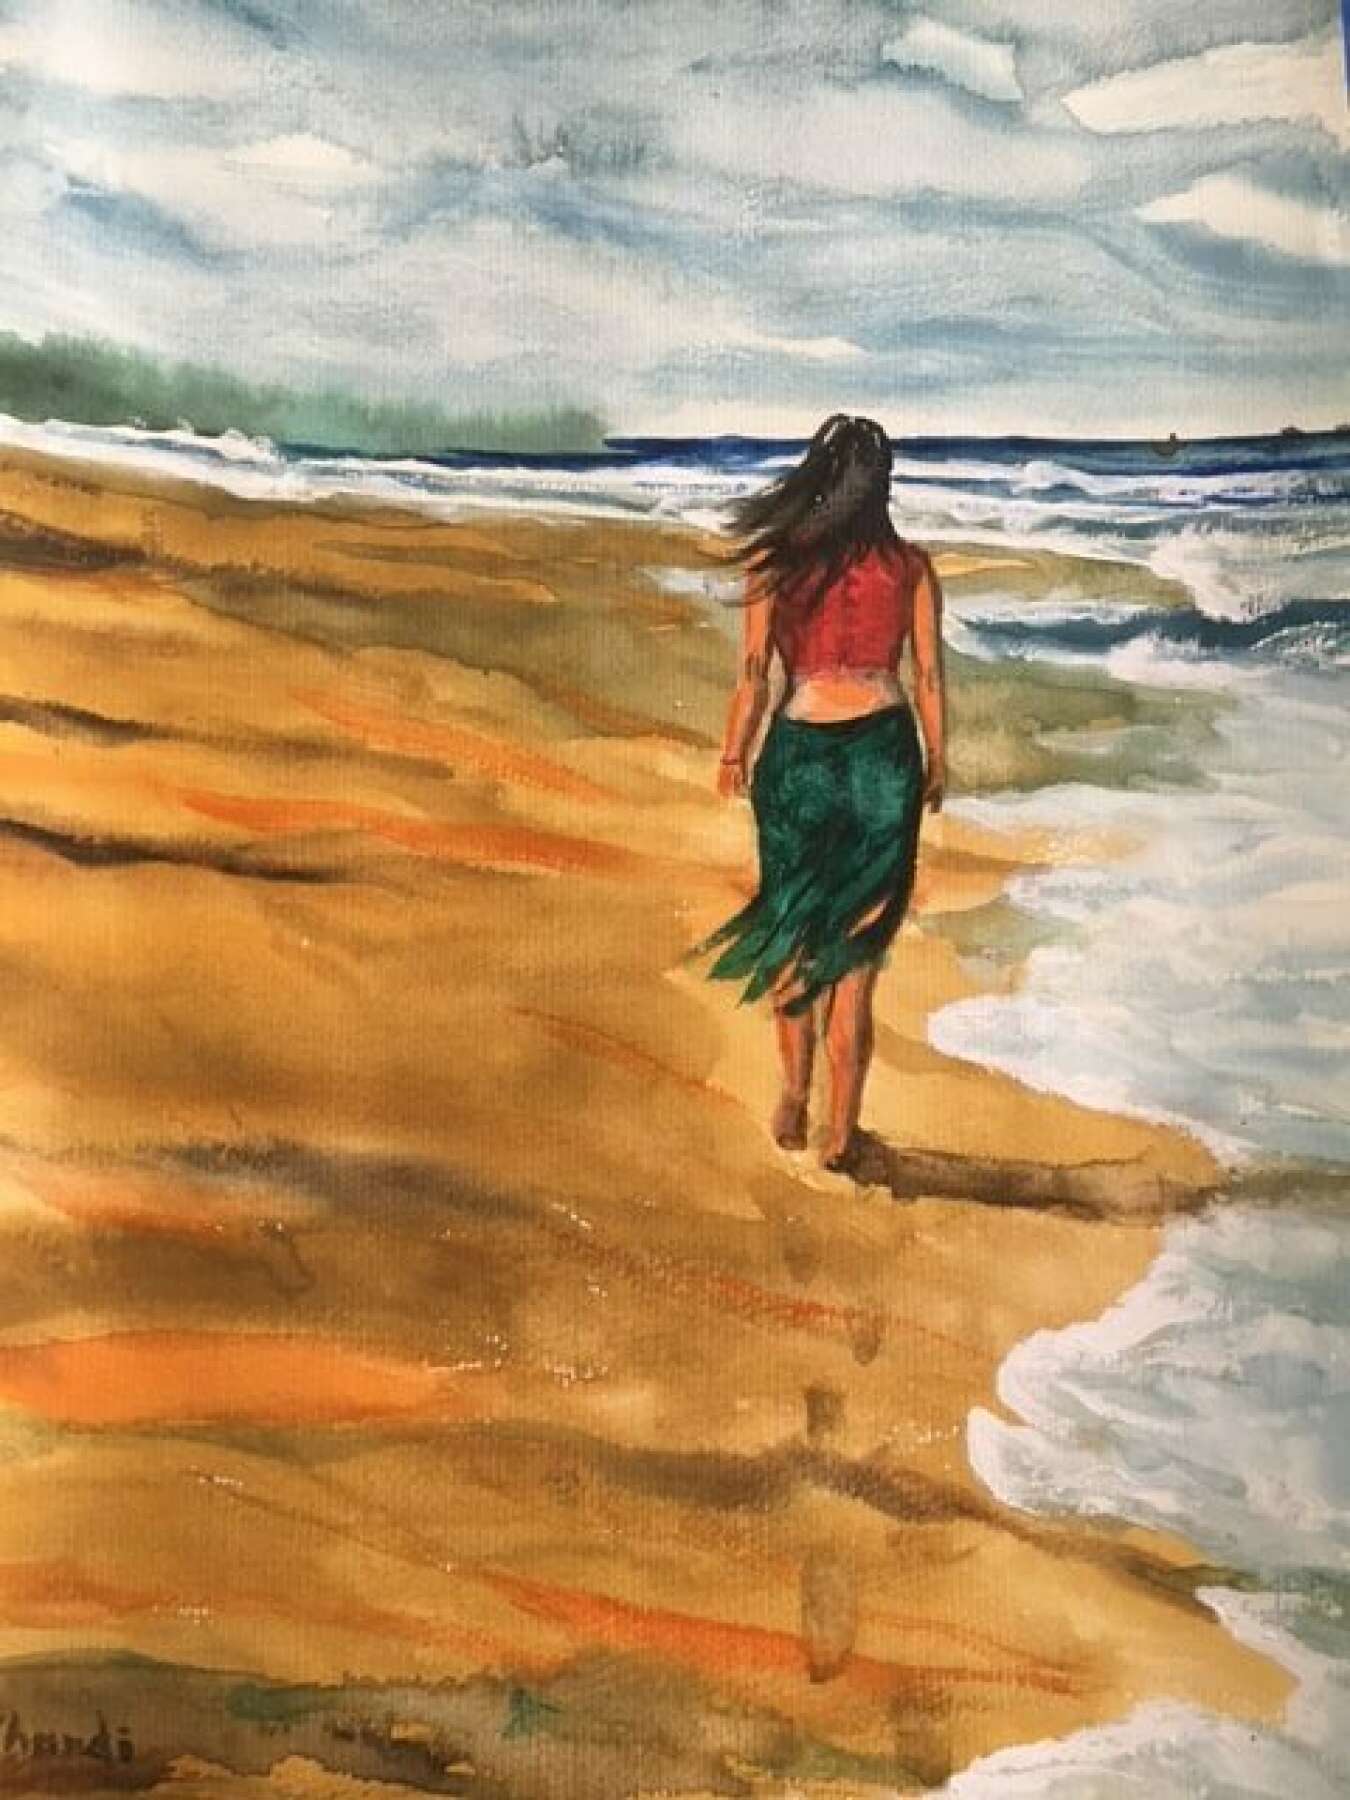 Walk on the Beach – Watercolor, 14 X 11 inches